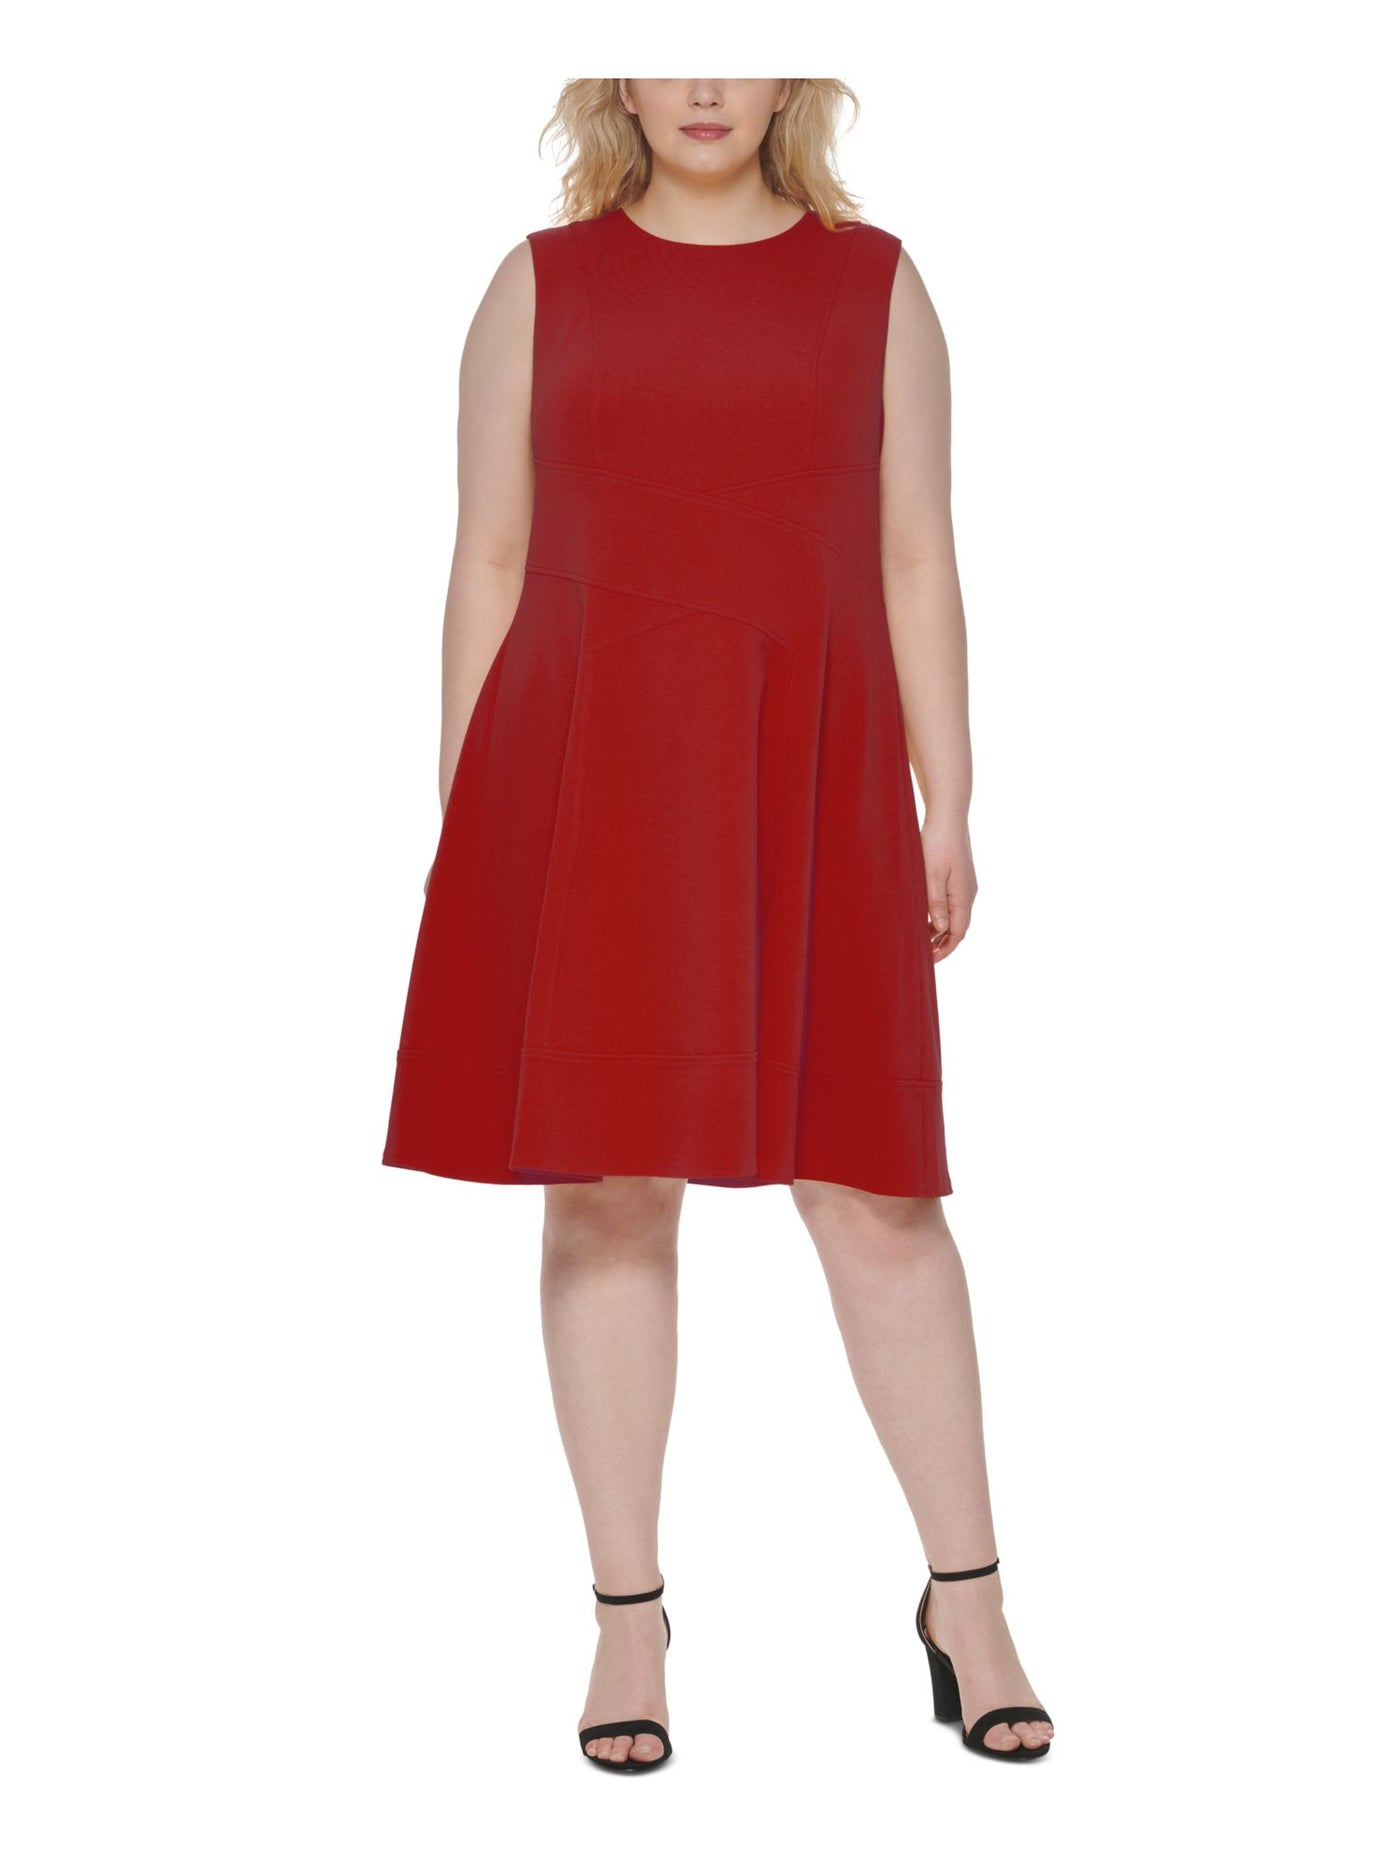 TOMMY HILFIGER Womens Red Zippered Unlined Sleeveless Crew Neck Knee Length Wear To Work Fit + Flare Dress Plus 20W